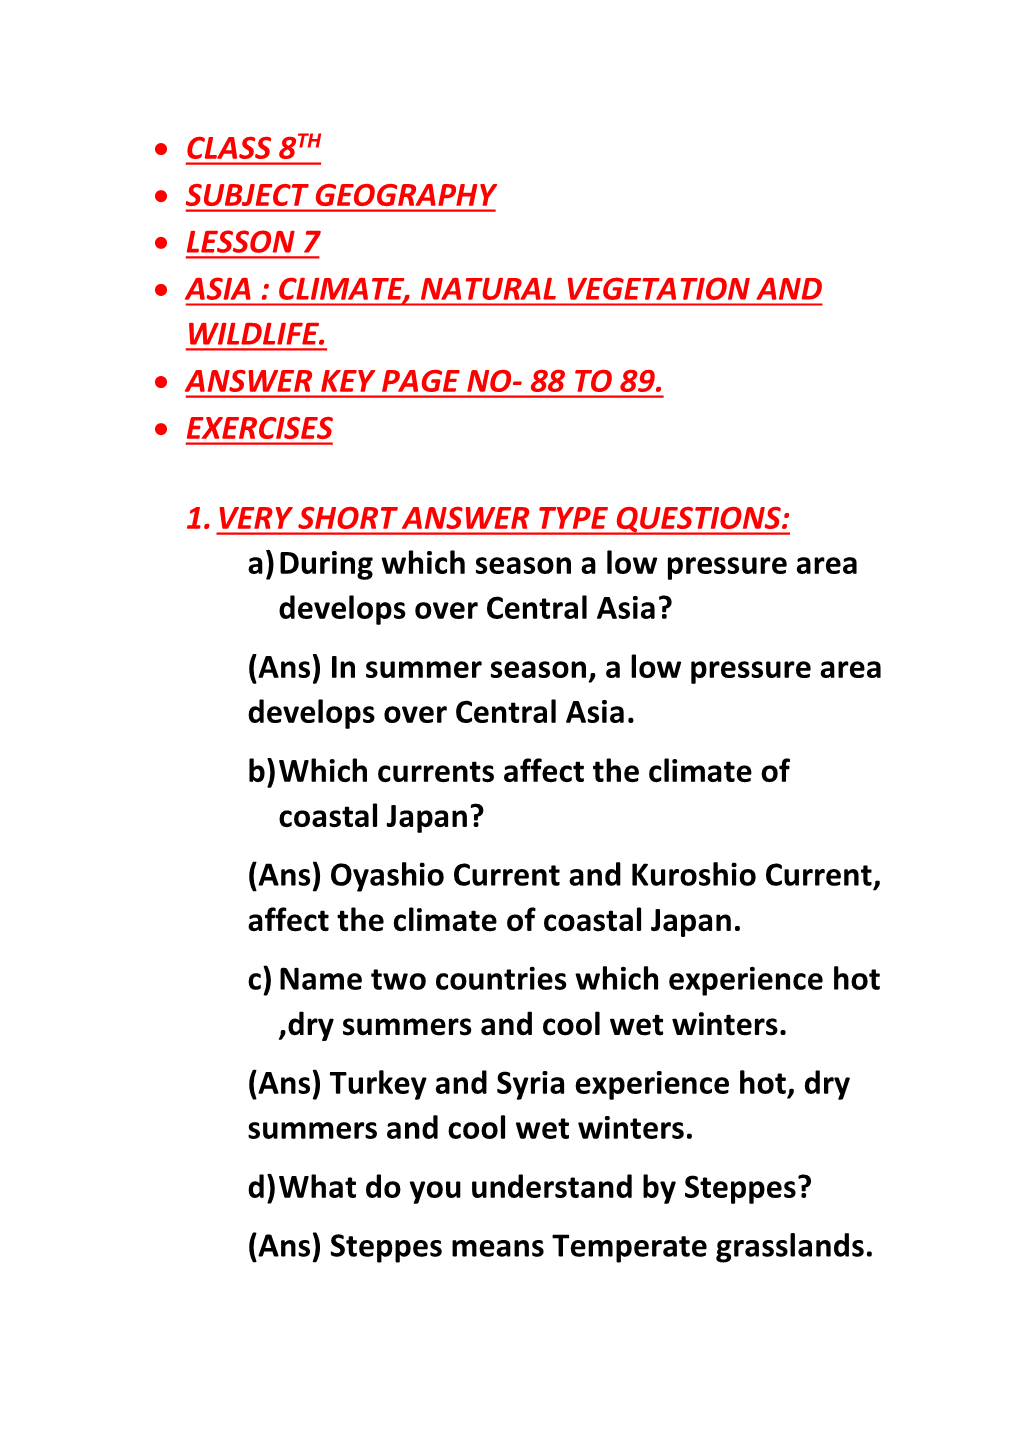 Climate, Natural Vegetation and Wildlife. • Answer Key Page No- 88 to 89